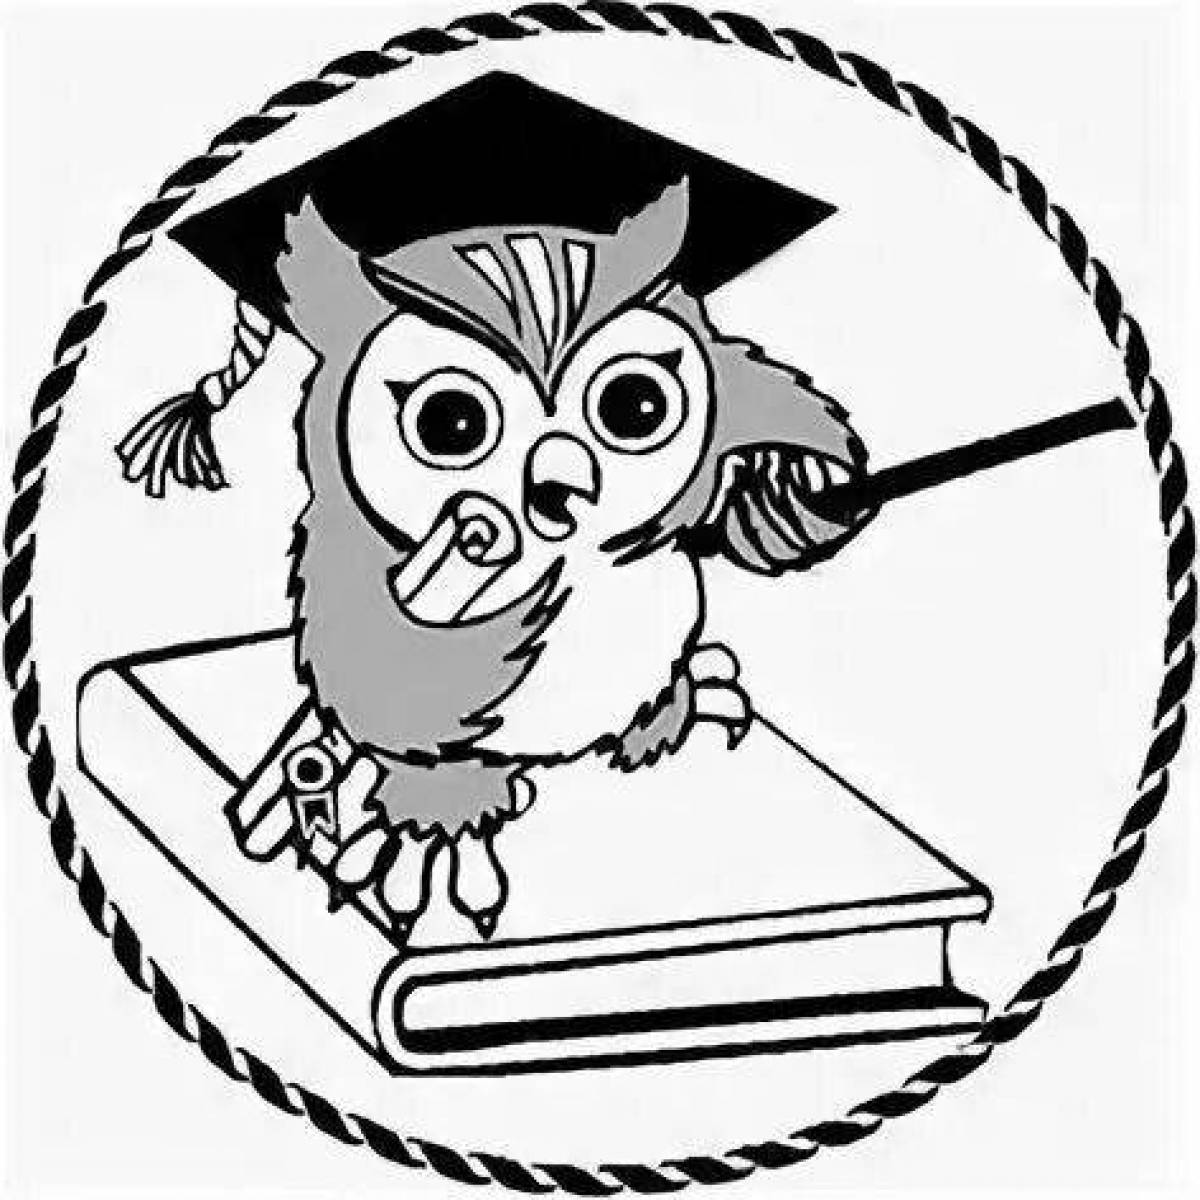 Coloring page wise owl with a wise expression